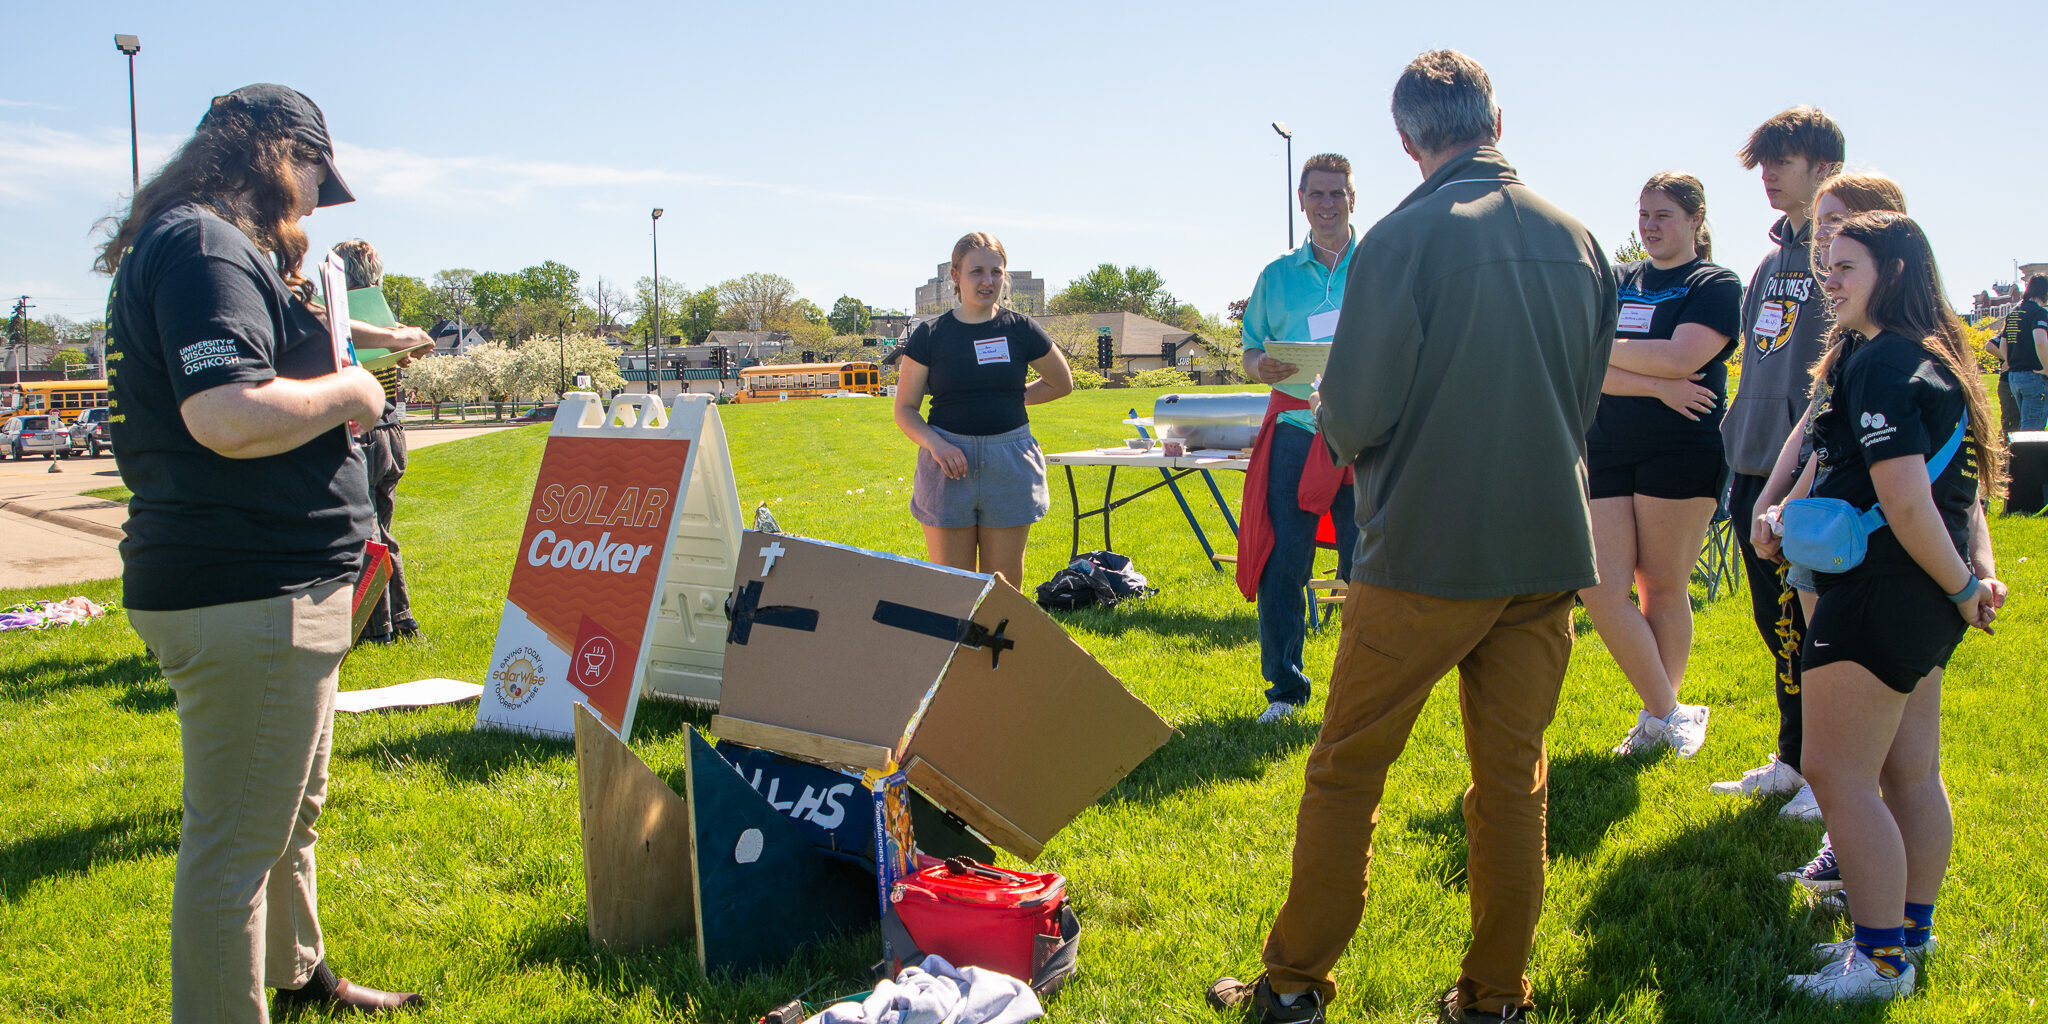 A group of high school students speaks with adults about a solar-powered food cooker on a sunny day.